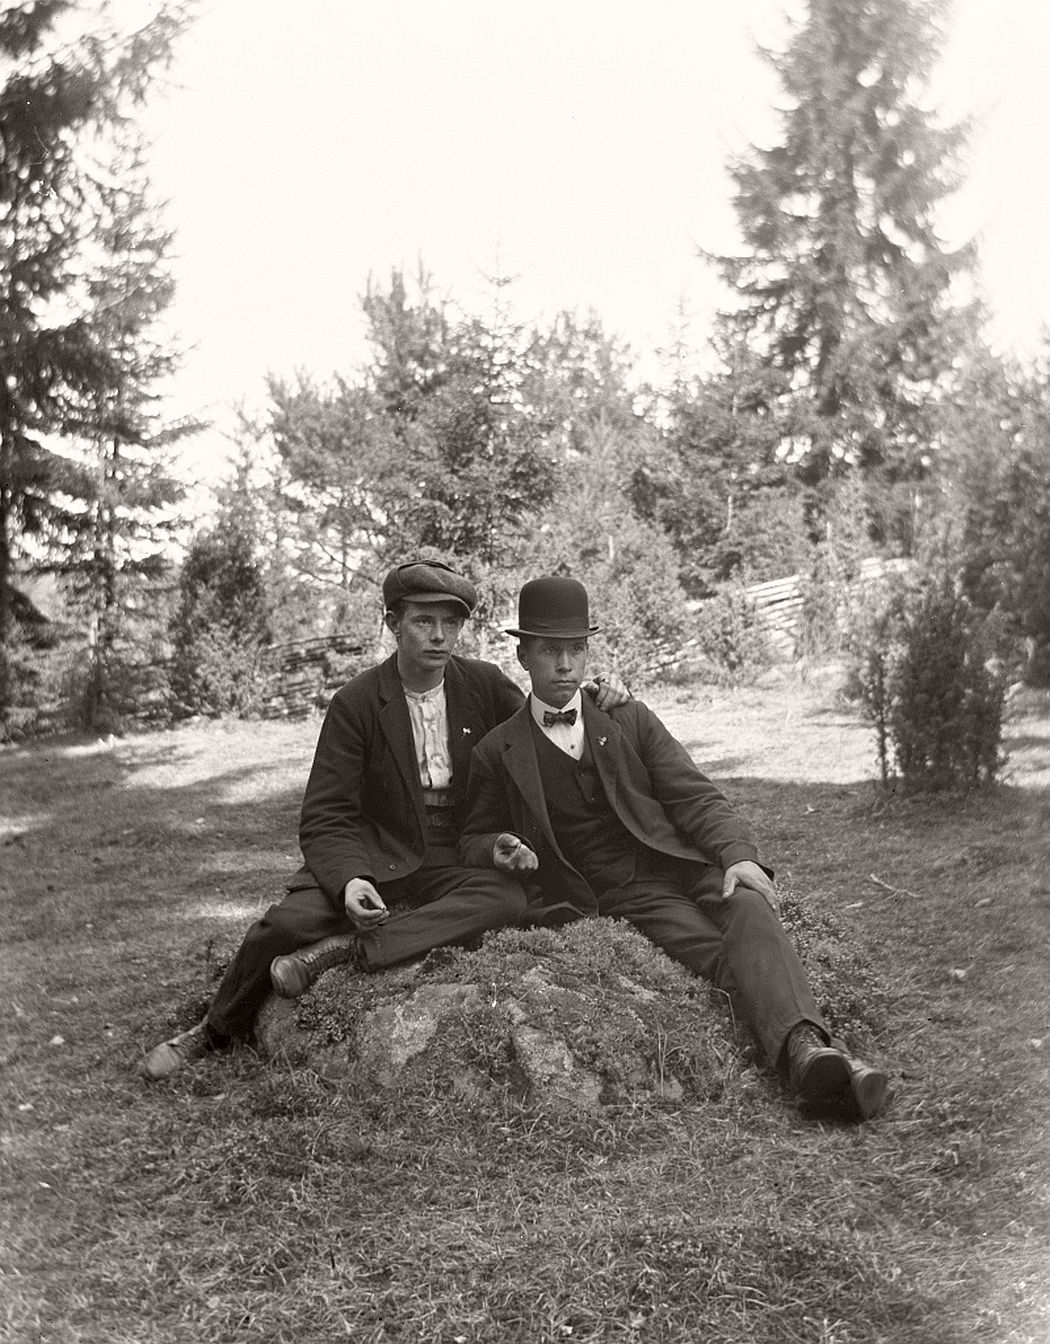 Two men on stone. To the left of the stone is Charles Smith (b. 1892), who was a profession painter and well known in Frinnaryd. The man on the right is not yet identified.